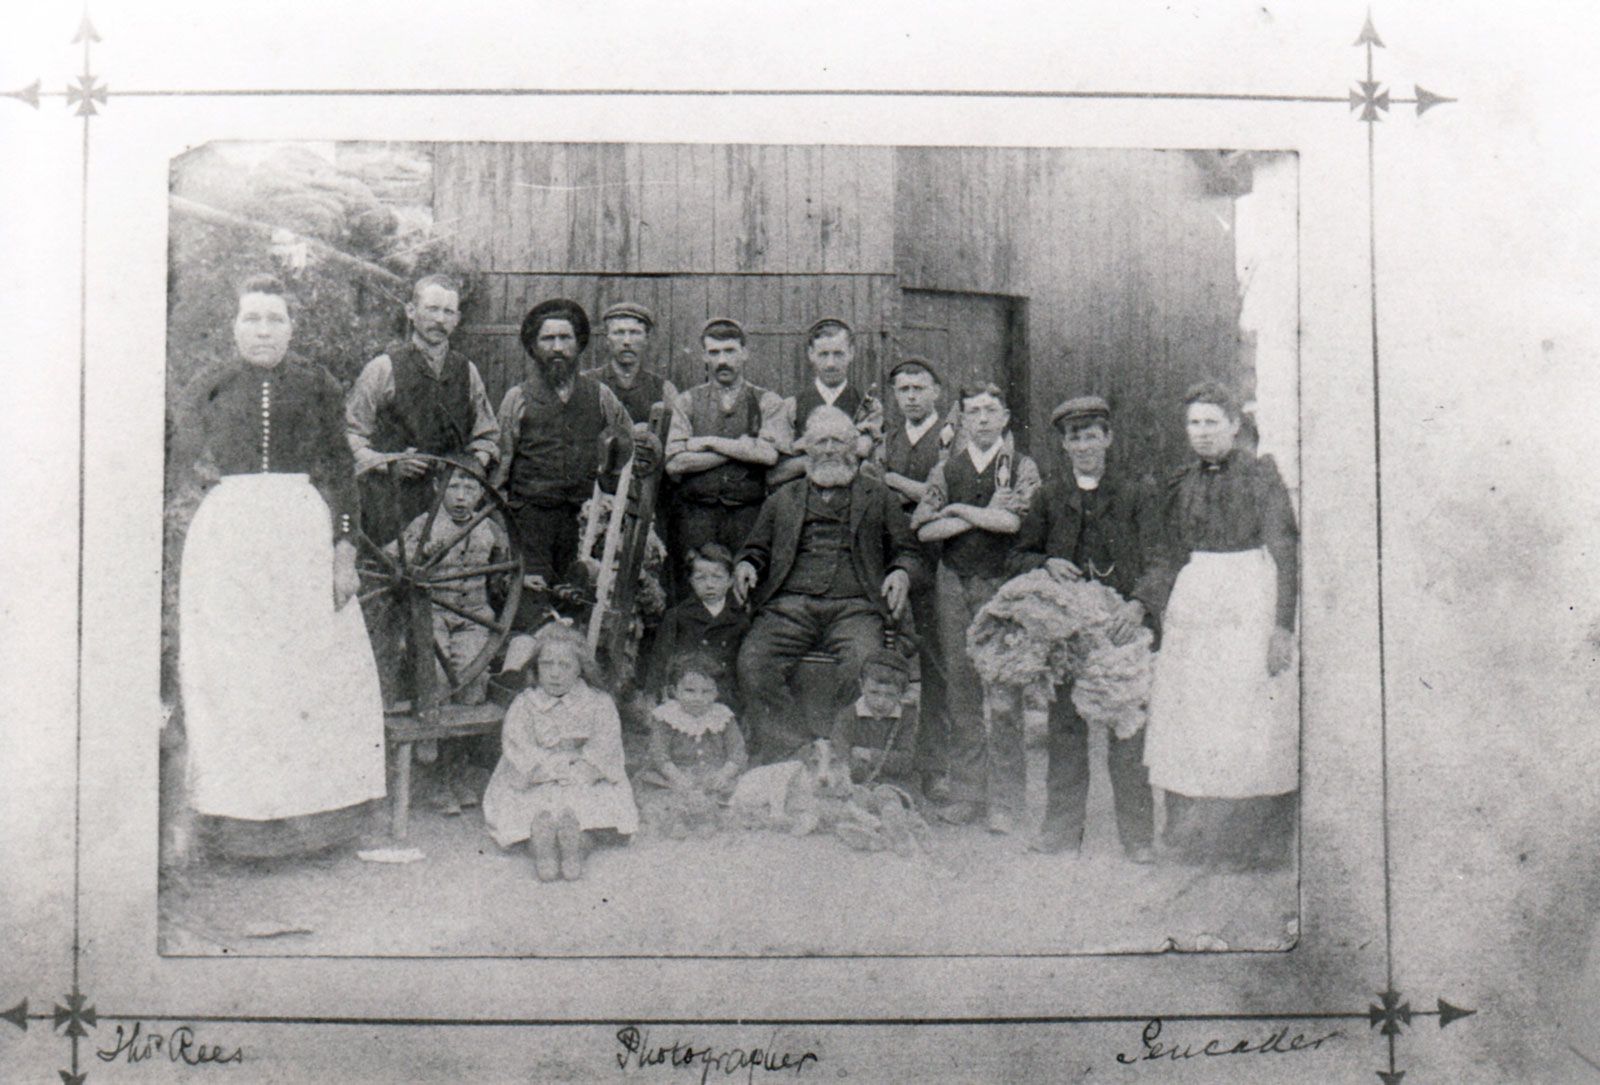 Goodwin Family and Staff, circa 1900.